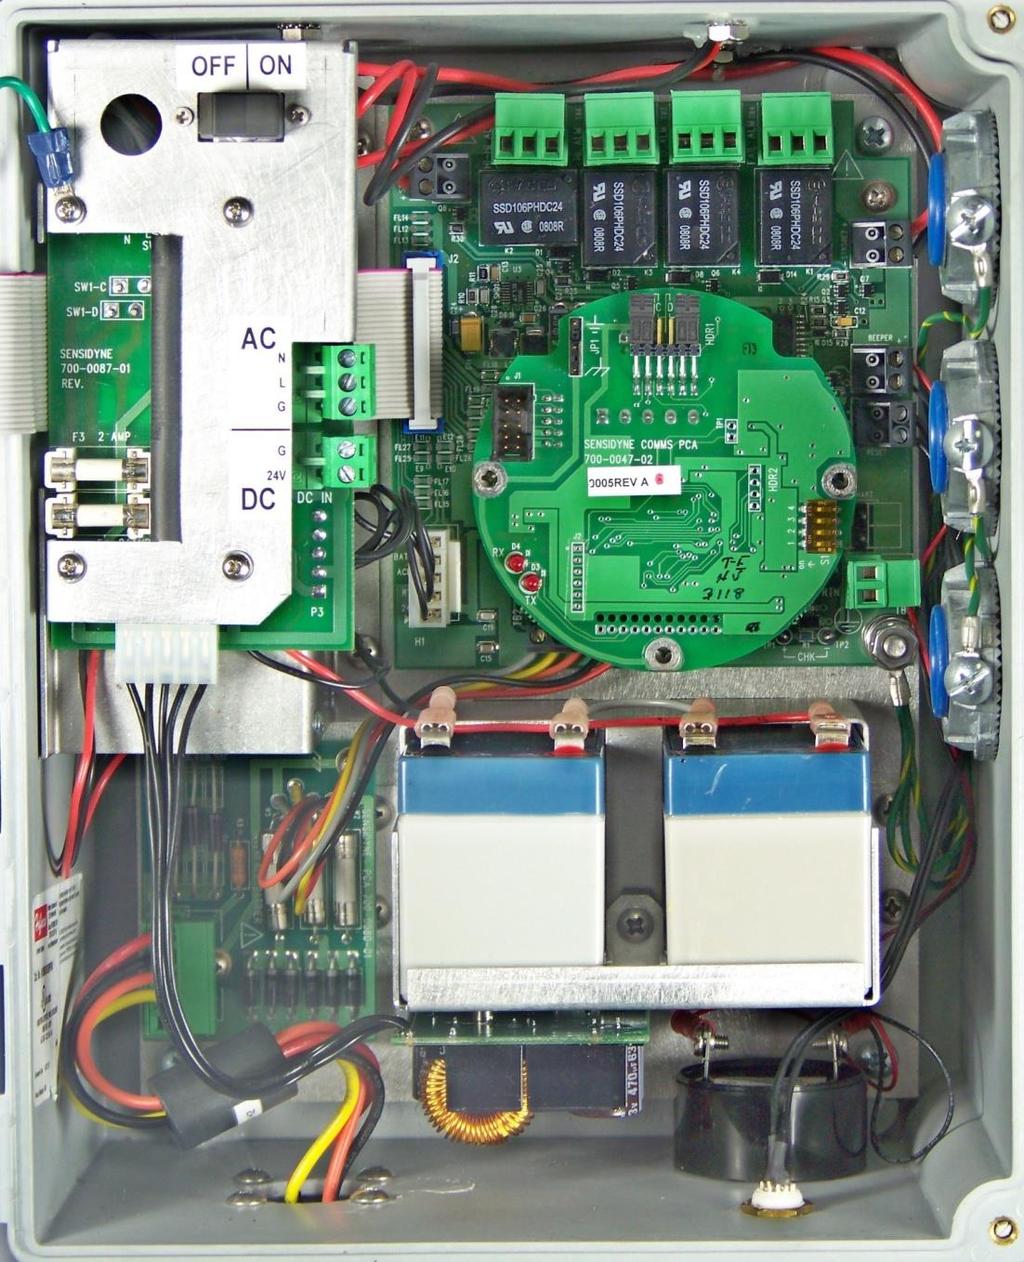 3 Power Assembly TB1, TB2 AC Power and, or External 24 VDC Power are connected to